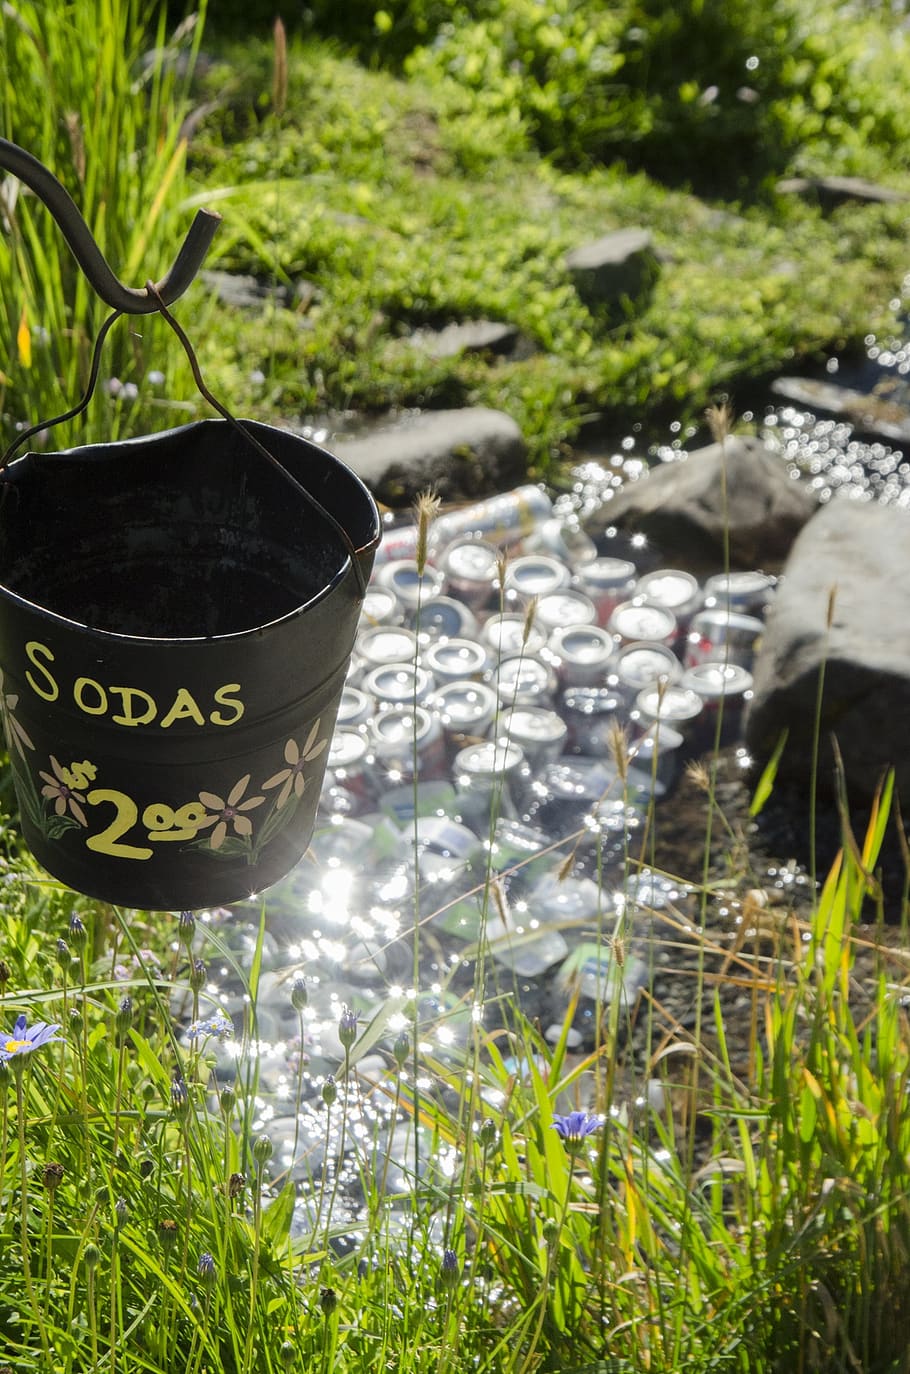 soda cans, bucket, creek, drink, water, beverage, plant, growth, nature, green color